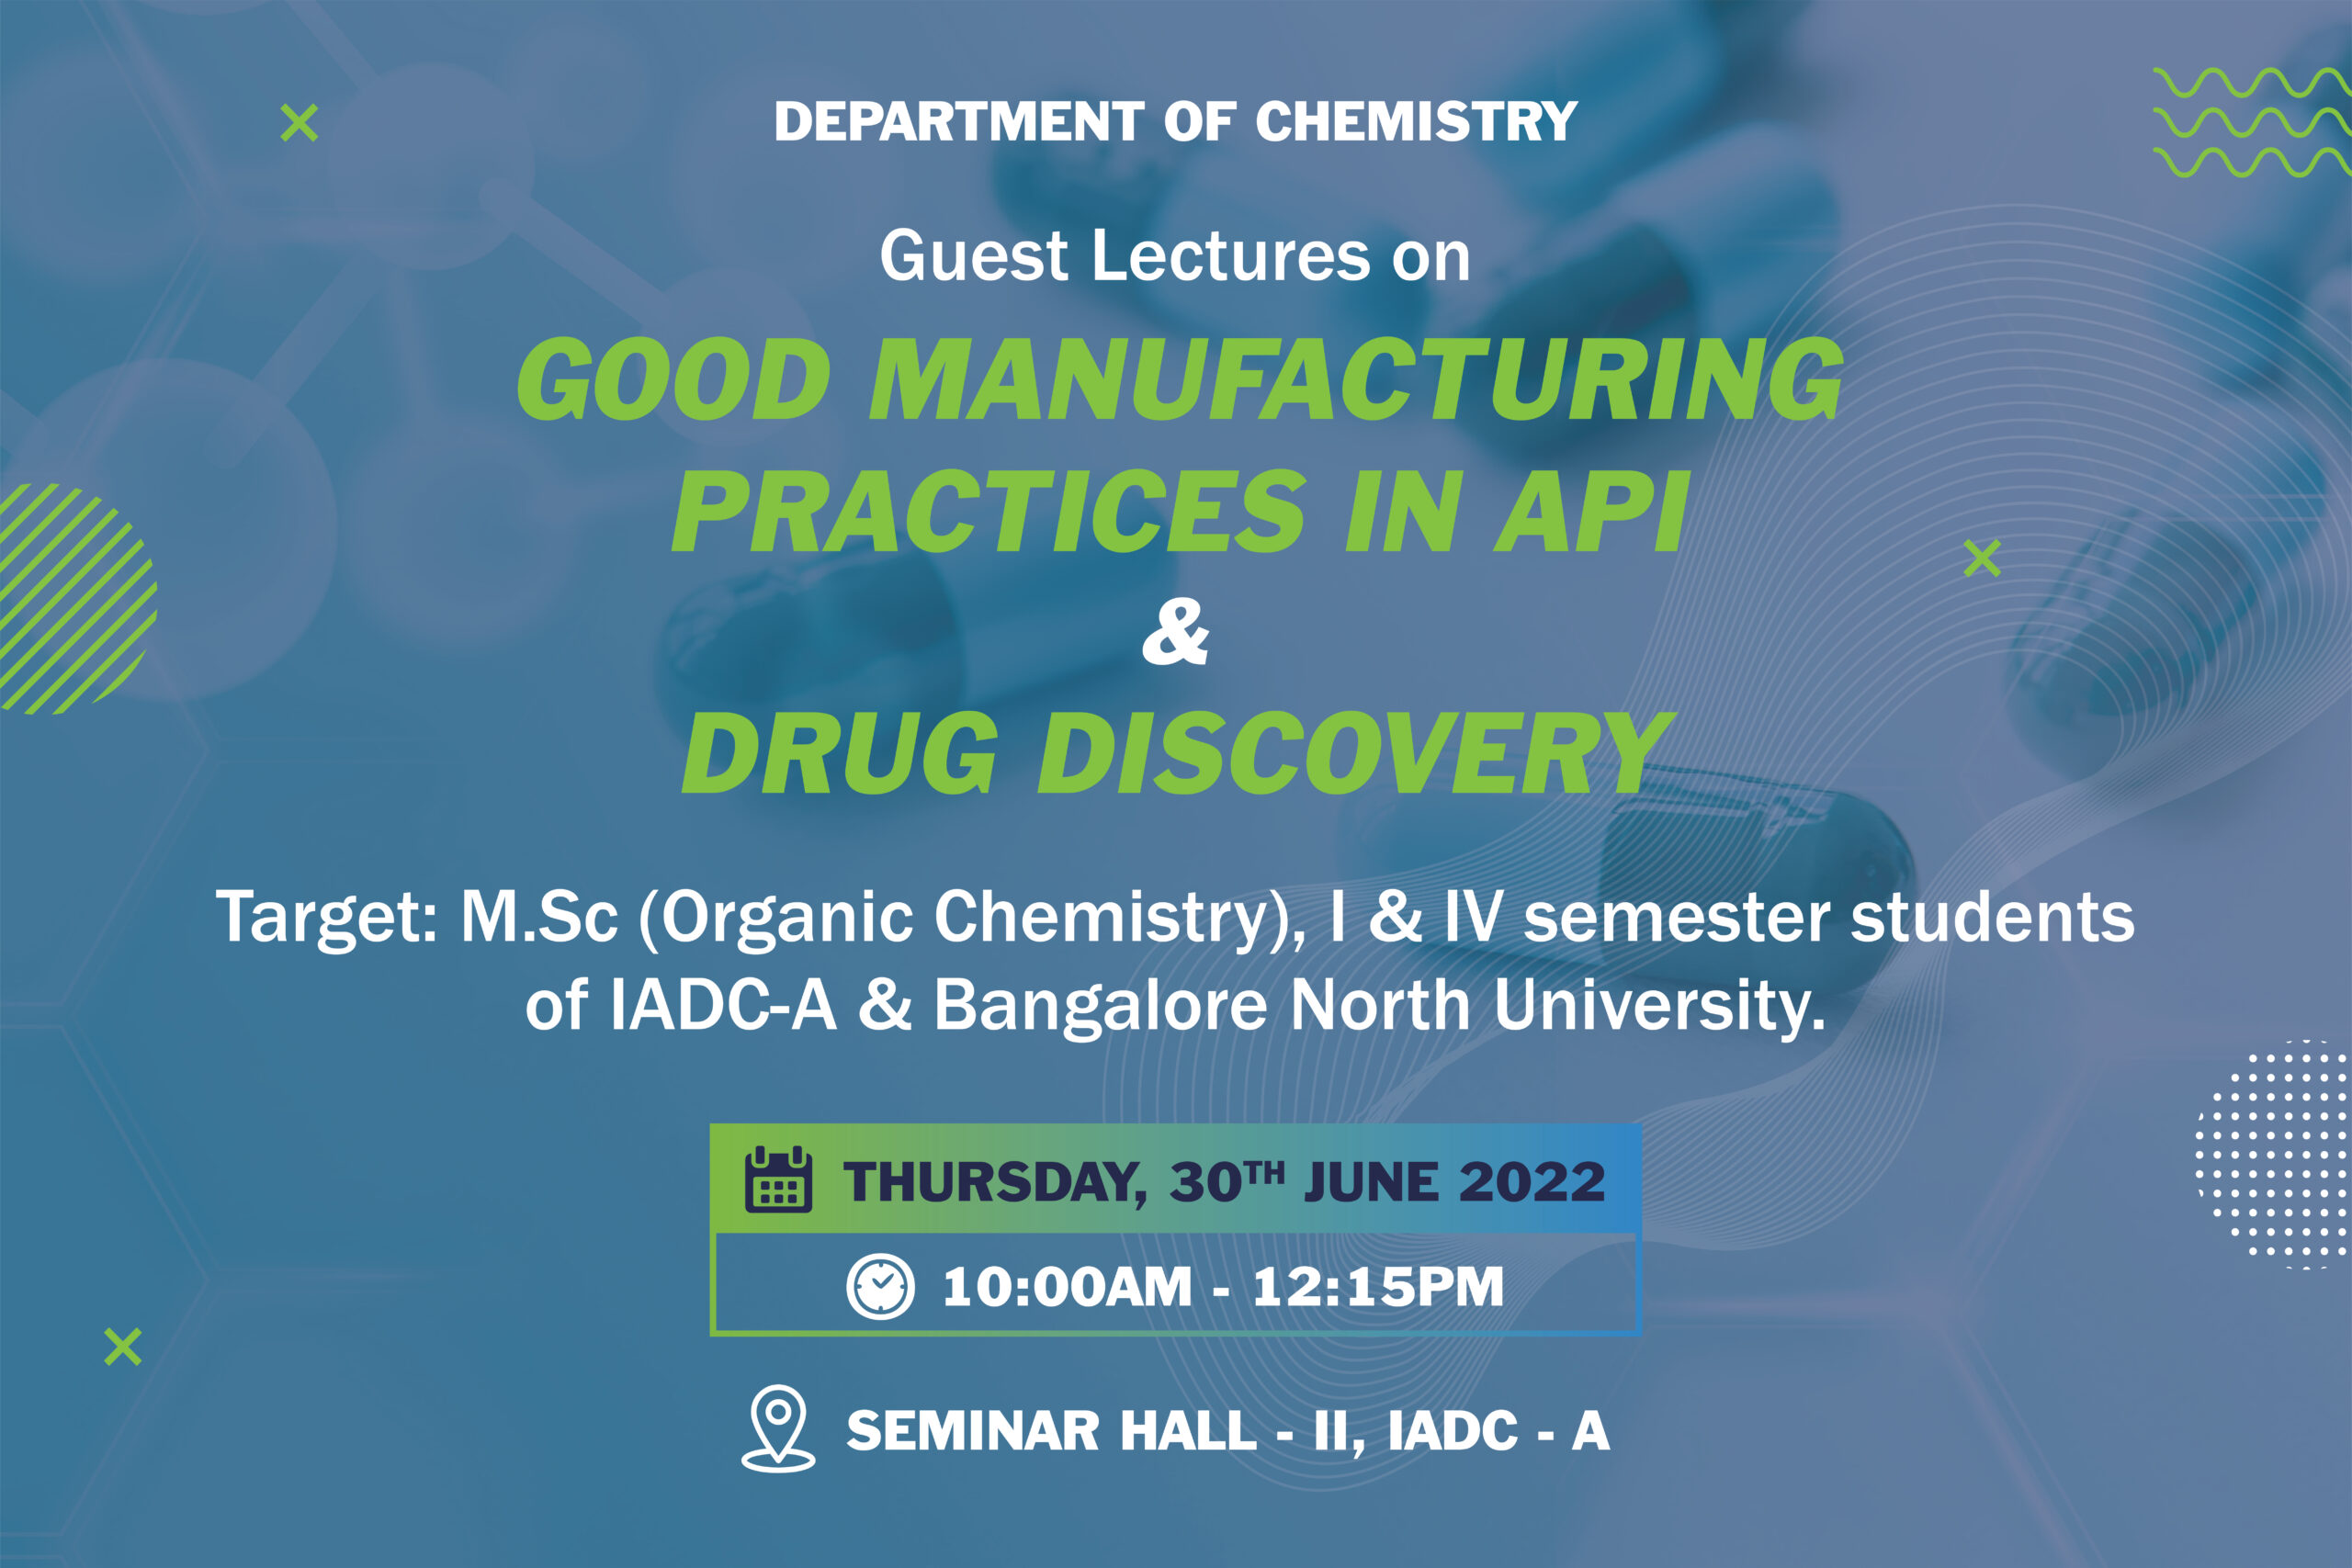 Guest lecture on Good Manufacturing Practice in API & Drug Discovery